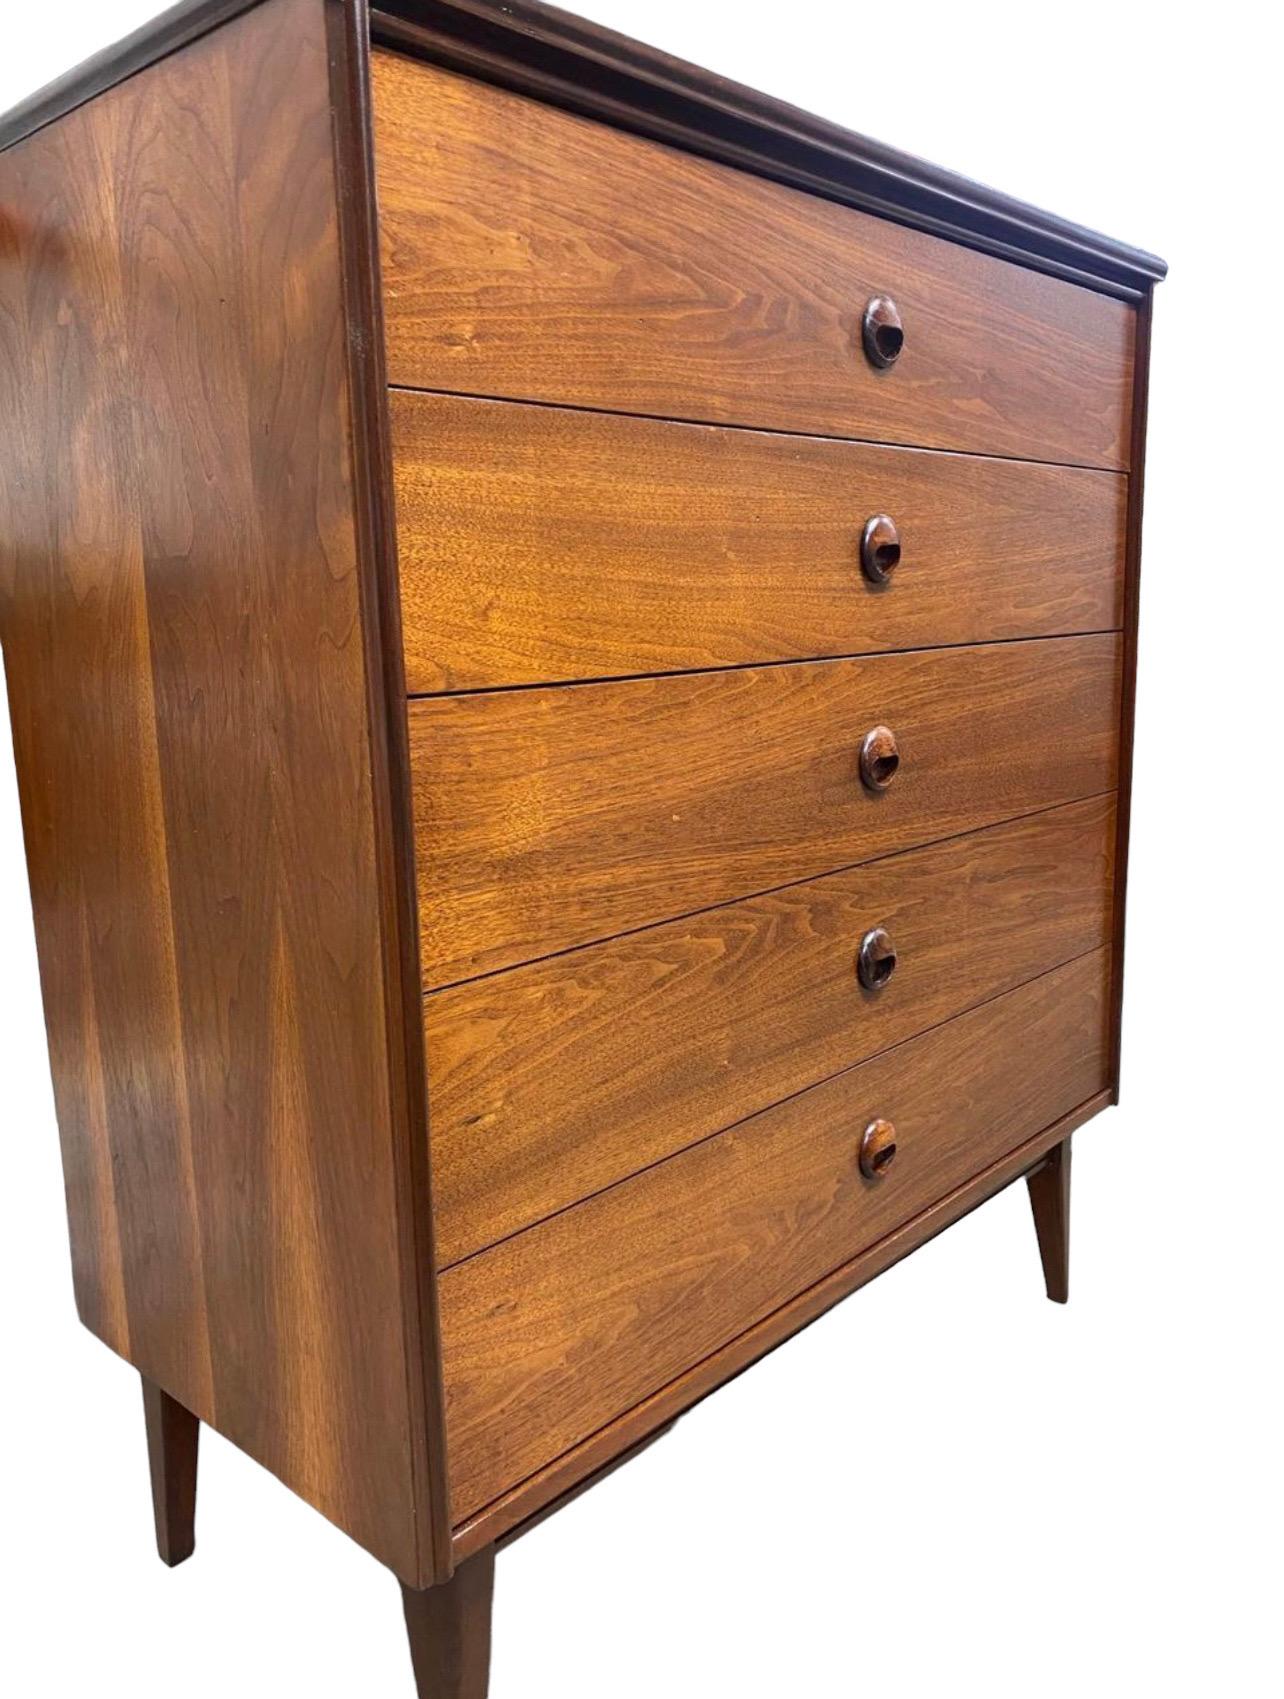 Mid Century Vintage Walnut Tallboy Dresser by Bassett Furniture in Excellent Condition. Four Drawers Including Double Drawer. Dovetail Joinery and Sculpted Wood Pulls.

Dimensions. 38 W ; 18 D ; 43 H